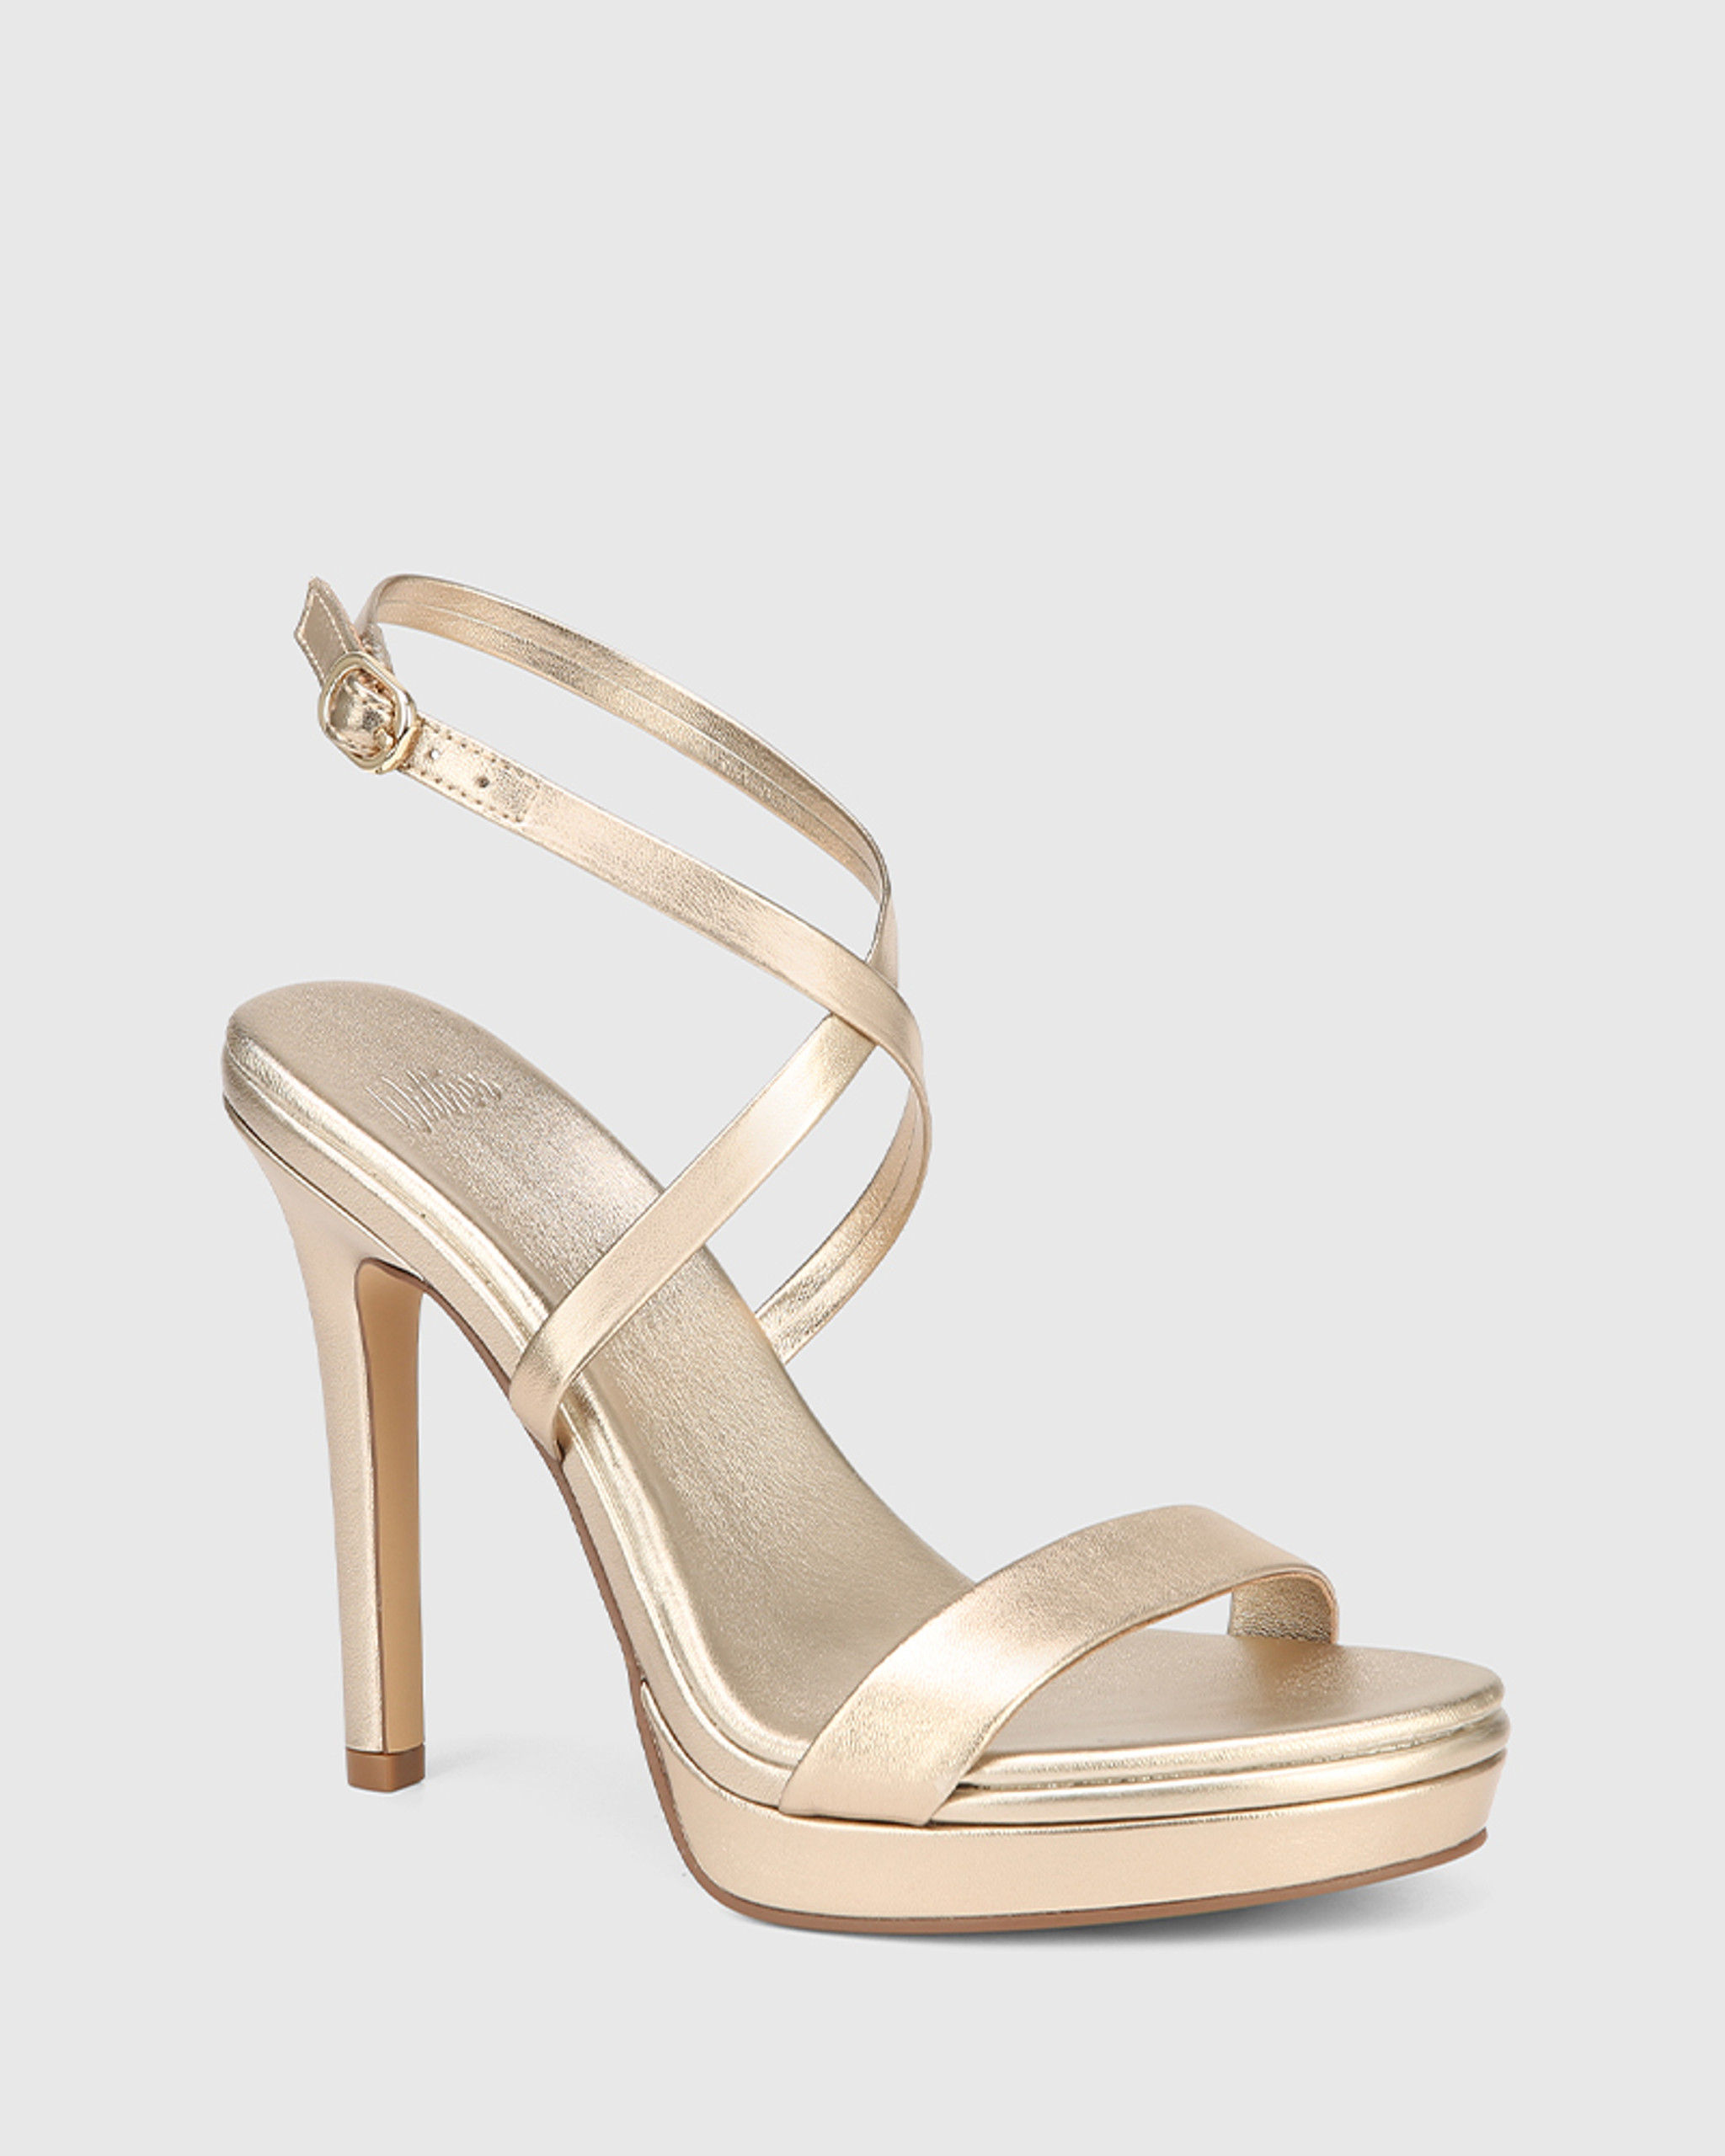 Tell Me Your Reason Platform Heels - Champagne | Heels, Platform shoes heels,  Fashion shoes heels